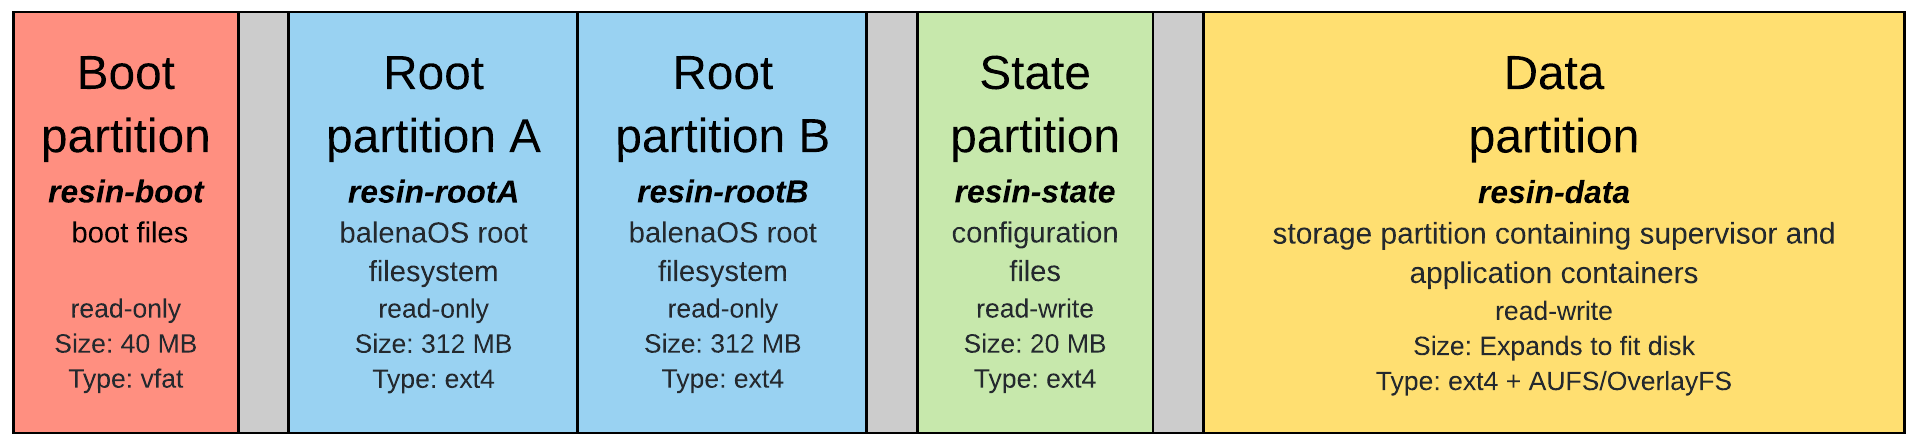 Image partition layout